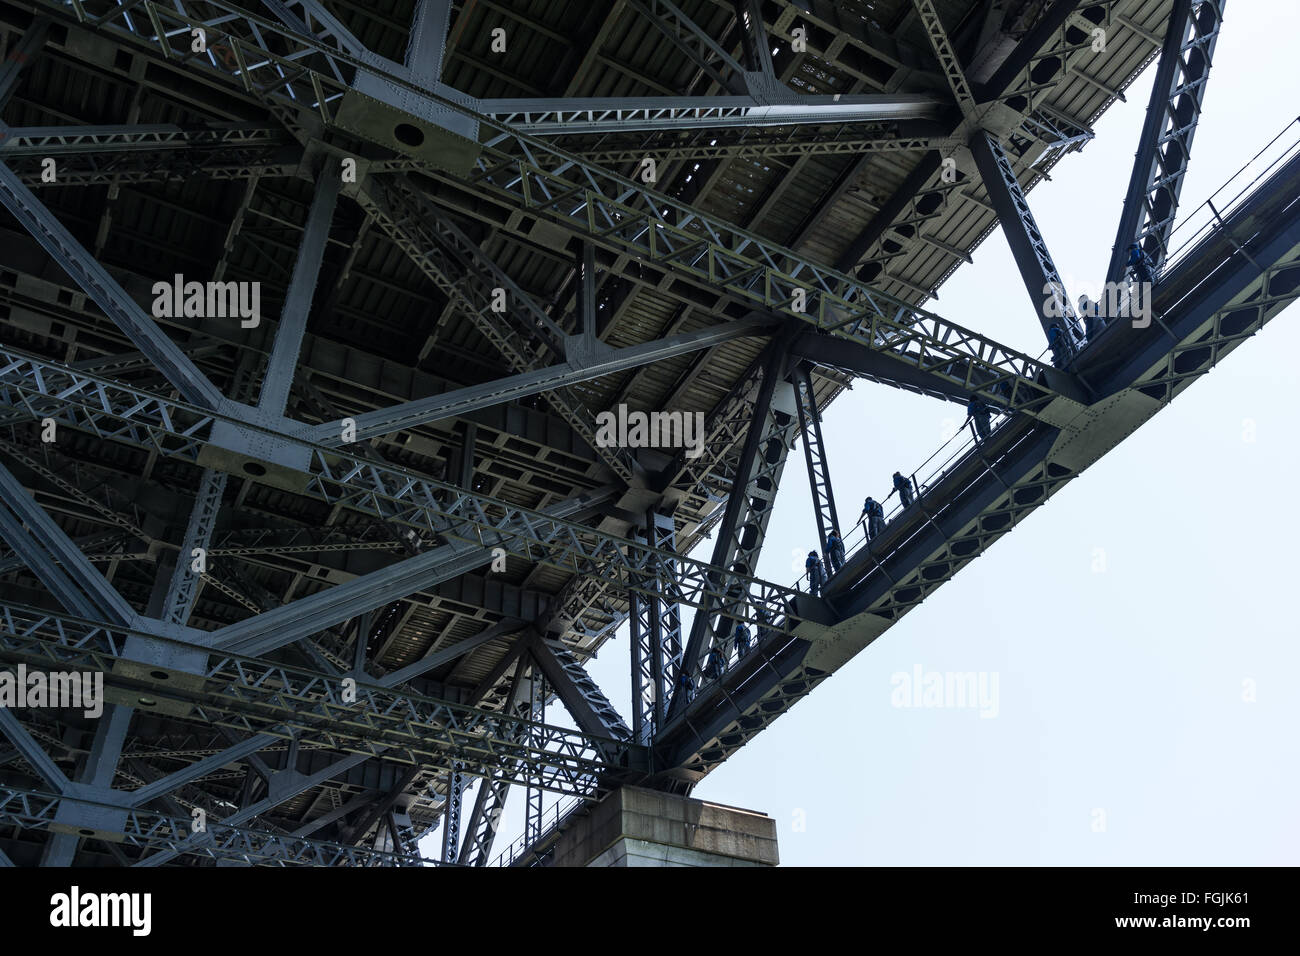 Walkers proceeding on the lower deck of the Sydney Harbour Bridge during a Bridge Climb Stock Photo